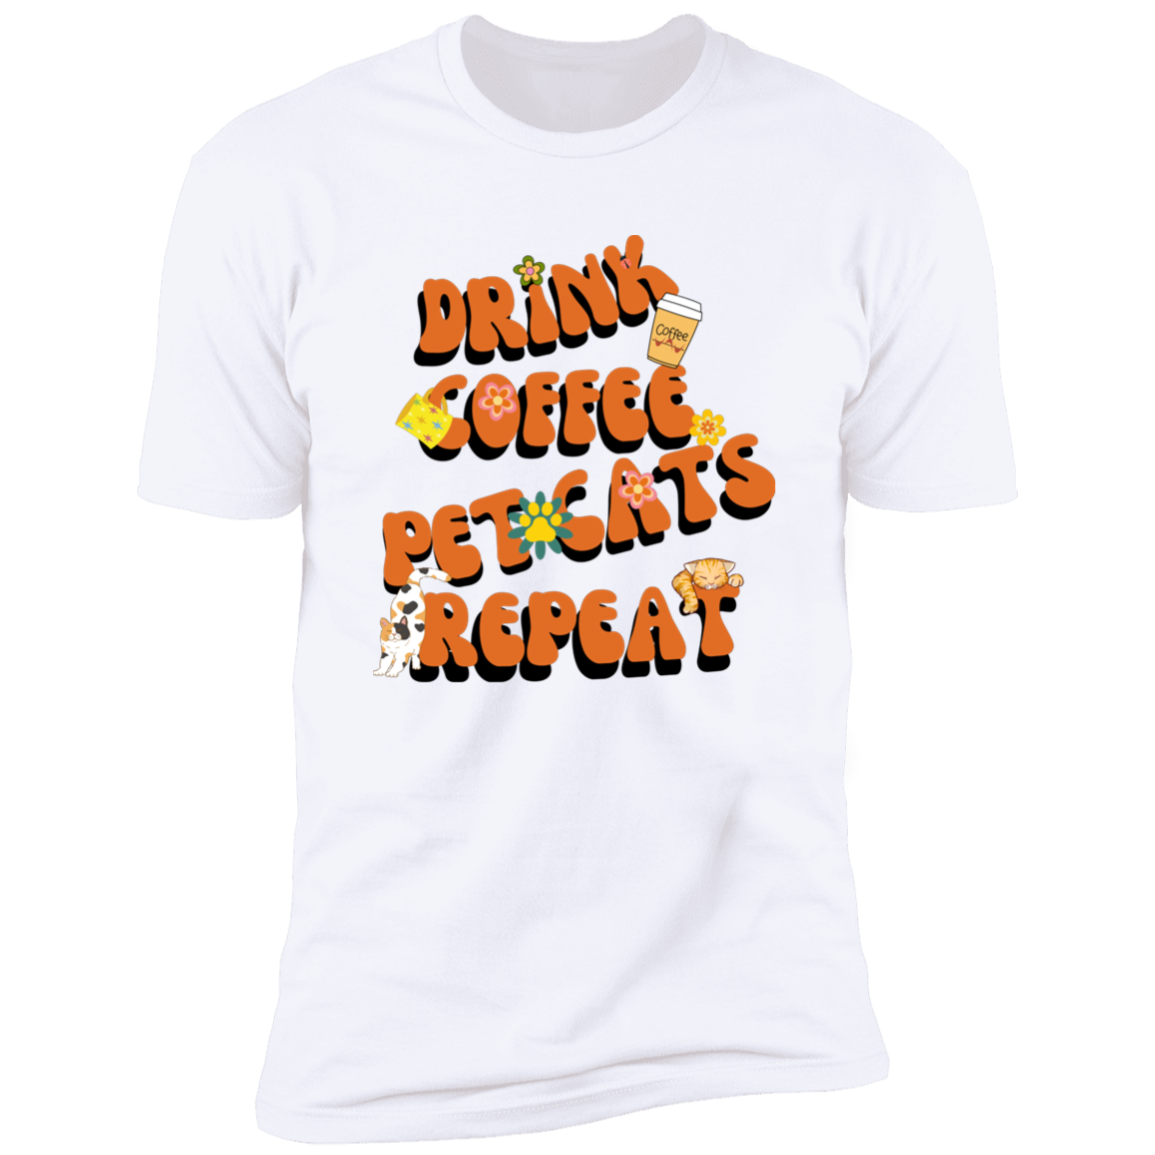 Drink Coffee Pet Cats Repeat T-shirt, Cat t-shirt for humans, in white